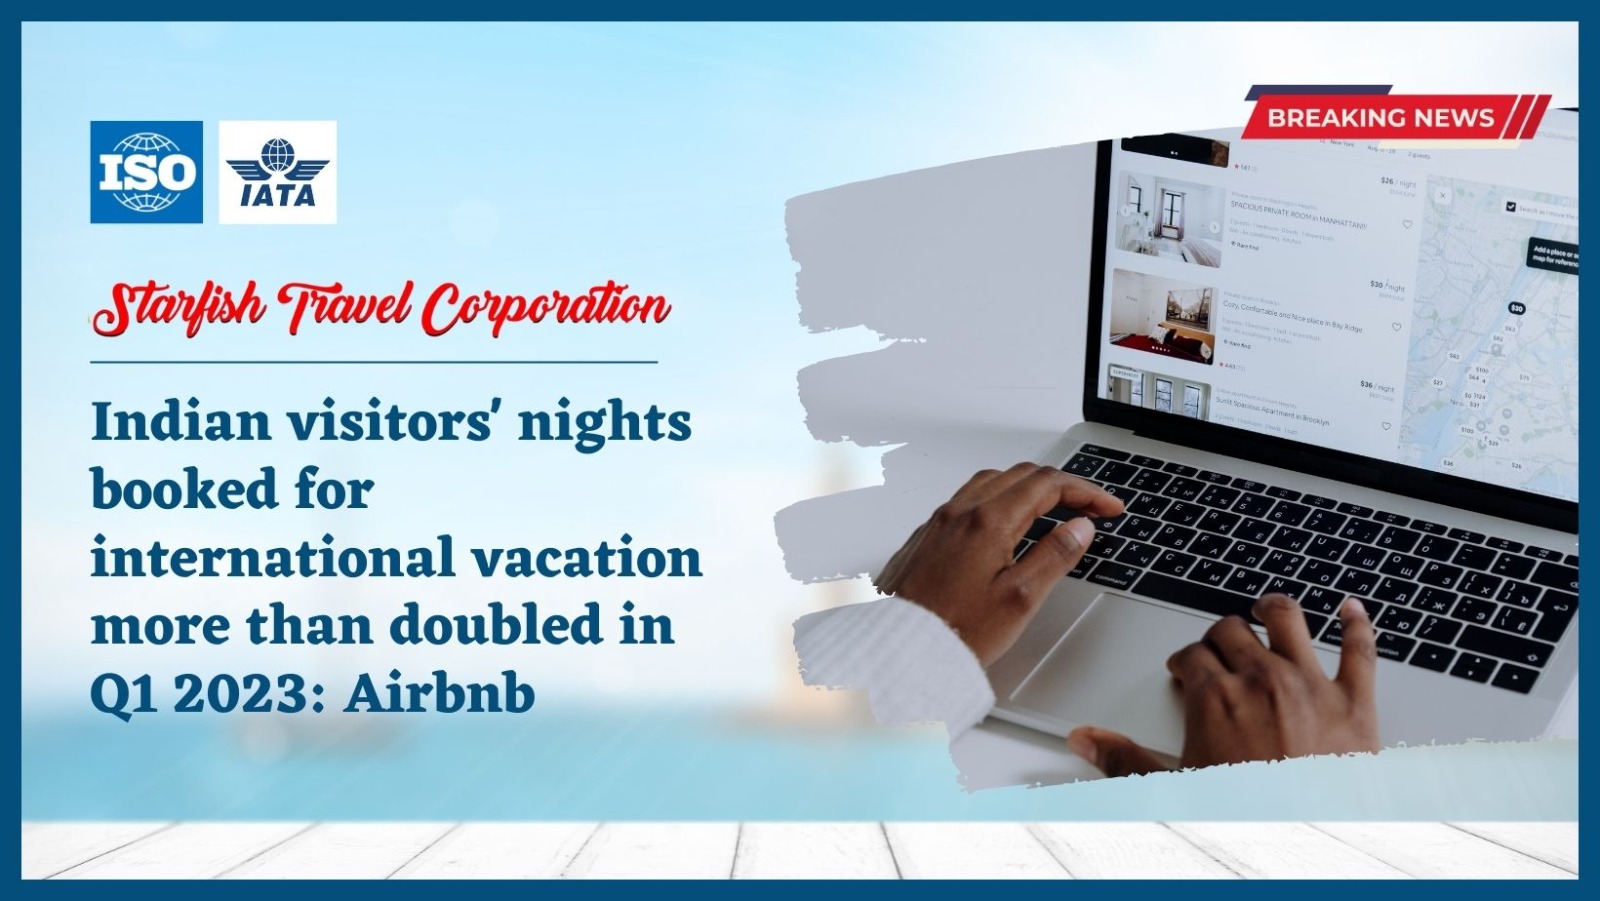 Indian visitors' nights booked for international vacation more than doubled in Q1 2023 Airbnb